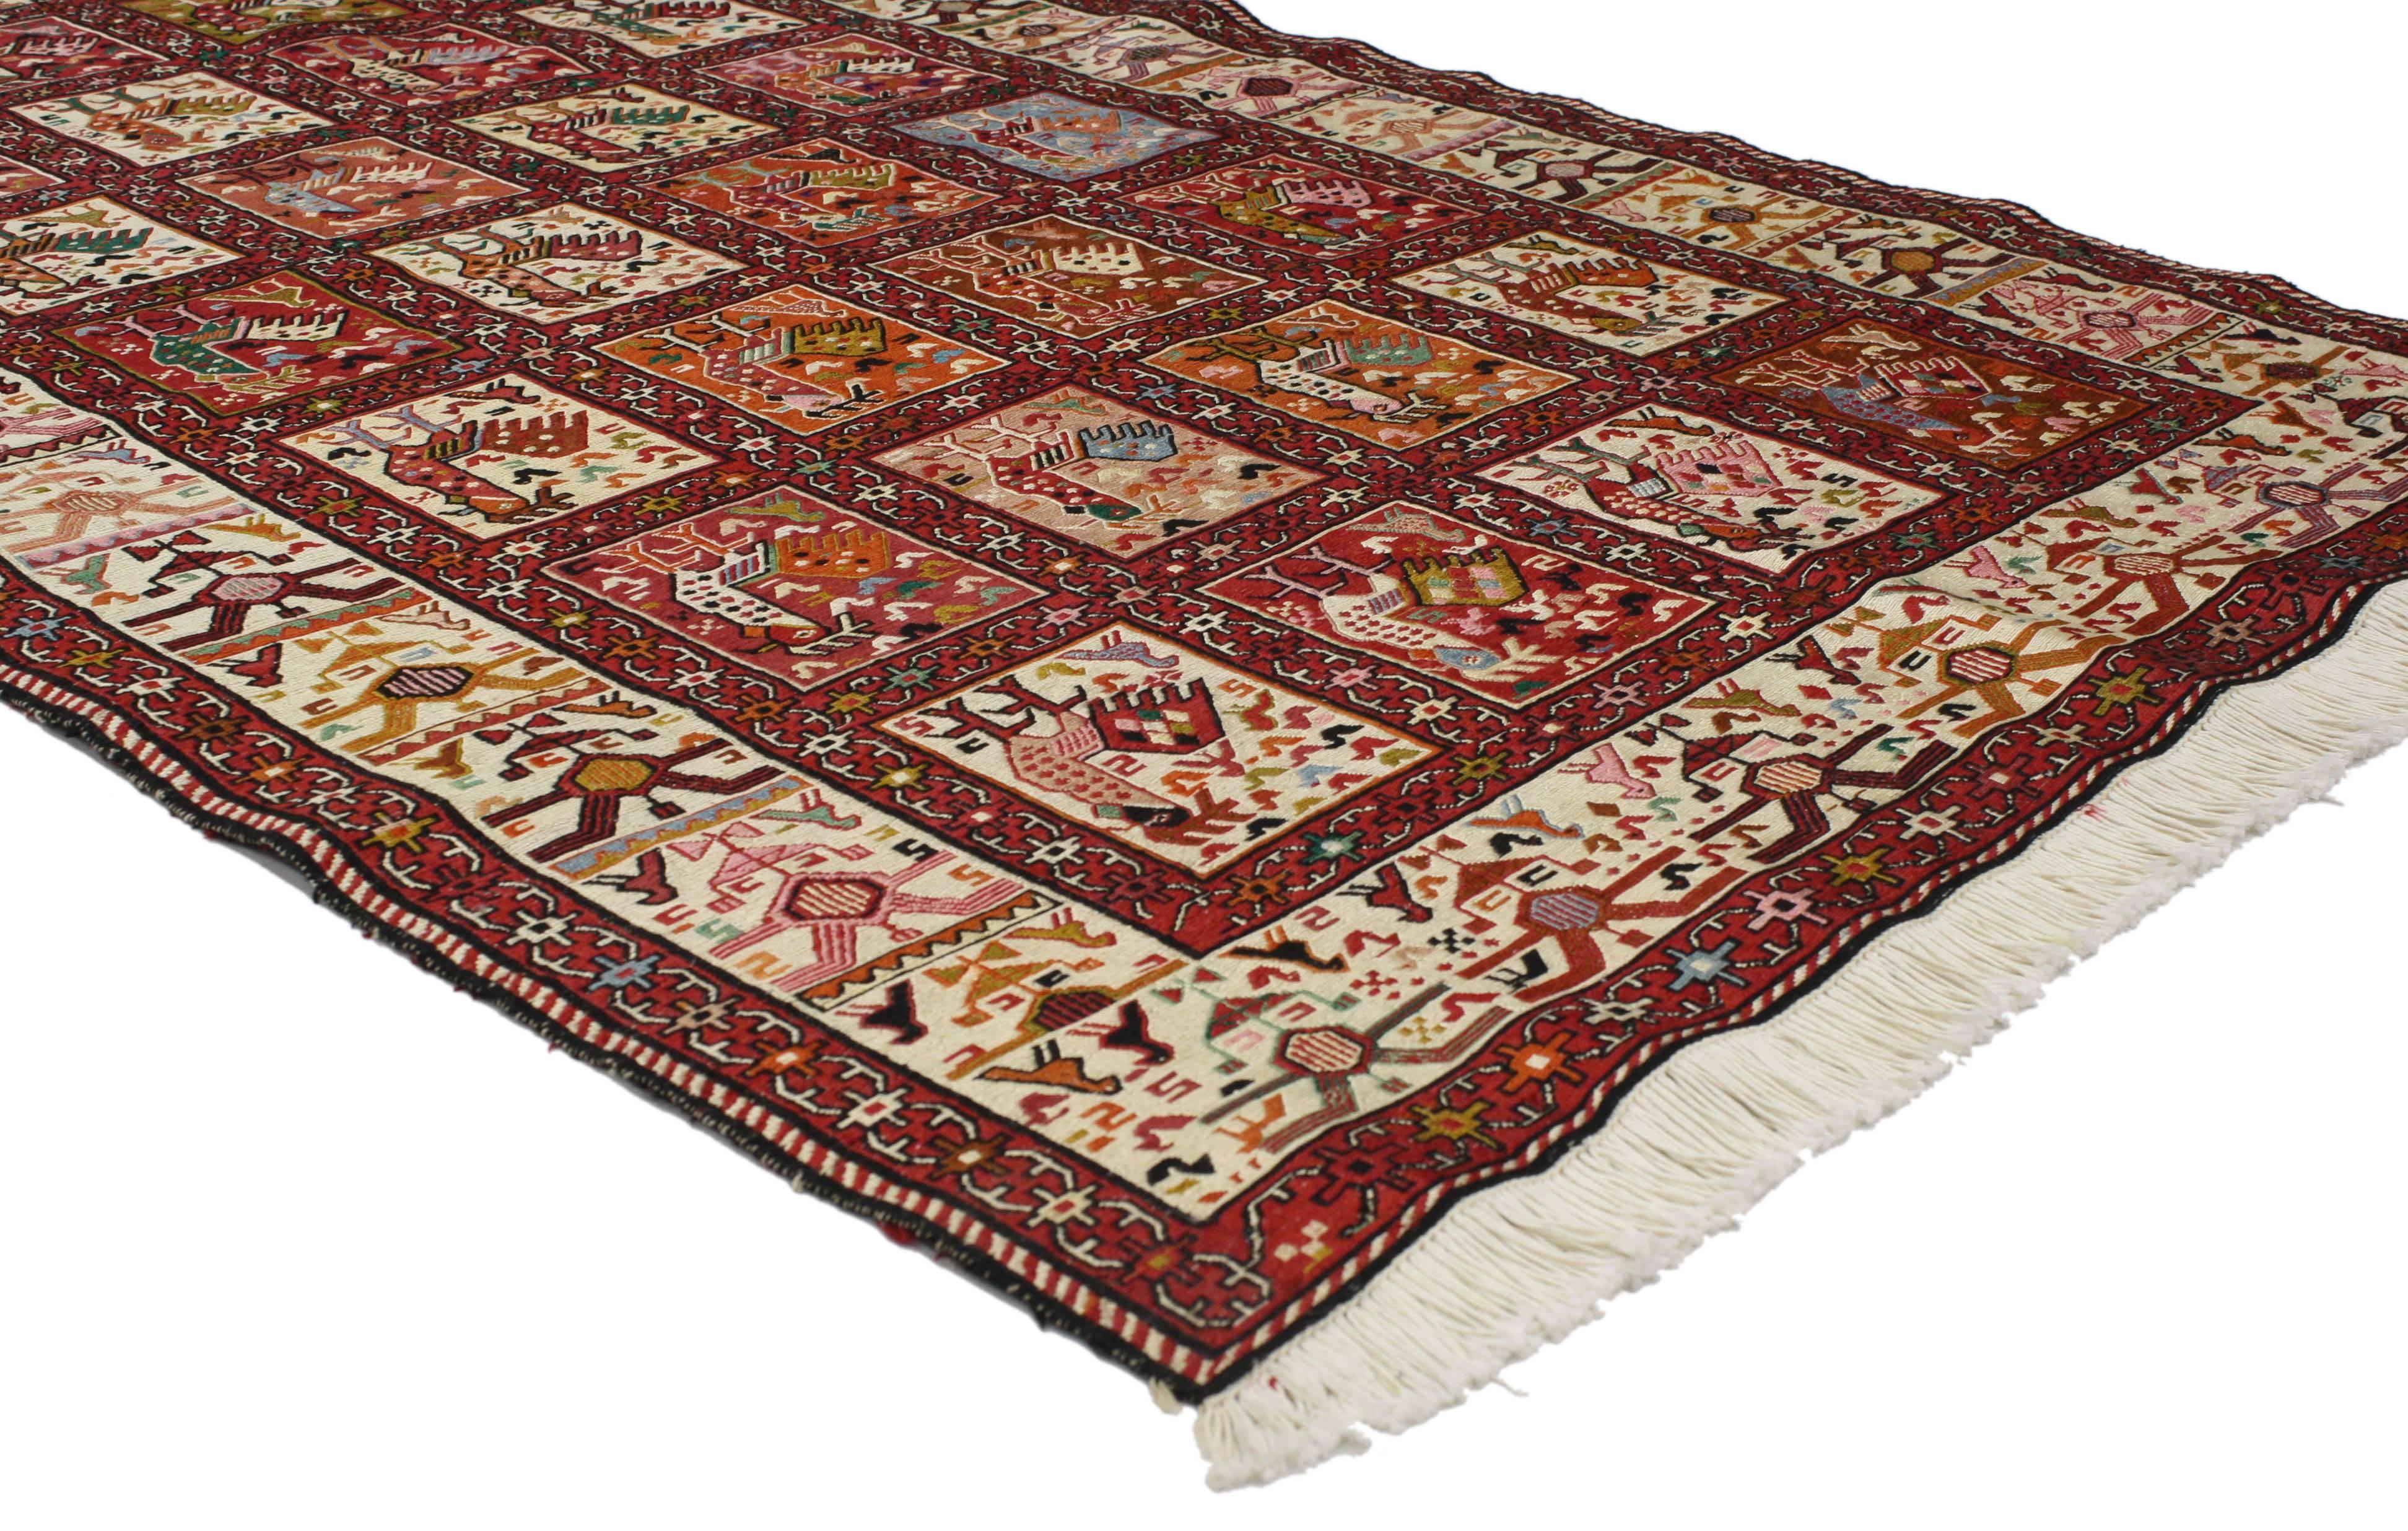 76997 Vintage Persian Soumak Rug, Flat-Weave Rooster Rug. With its nomadic charm and Tribal style, this vintage Persian Soumak rug with Tribal style is a striking statement piece. Hand-woven from wool, this flat-weave Soumak Rooster rug features a